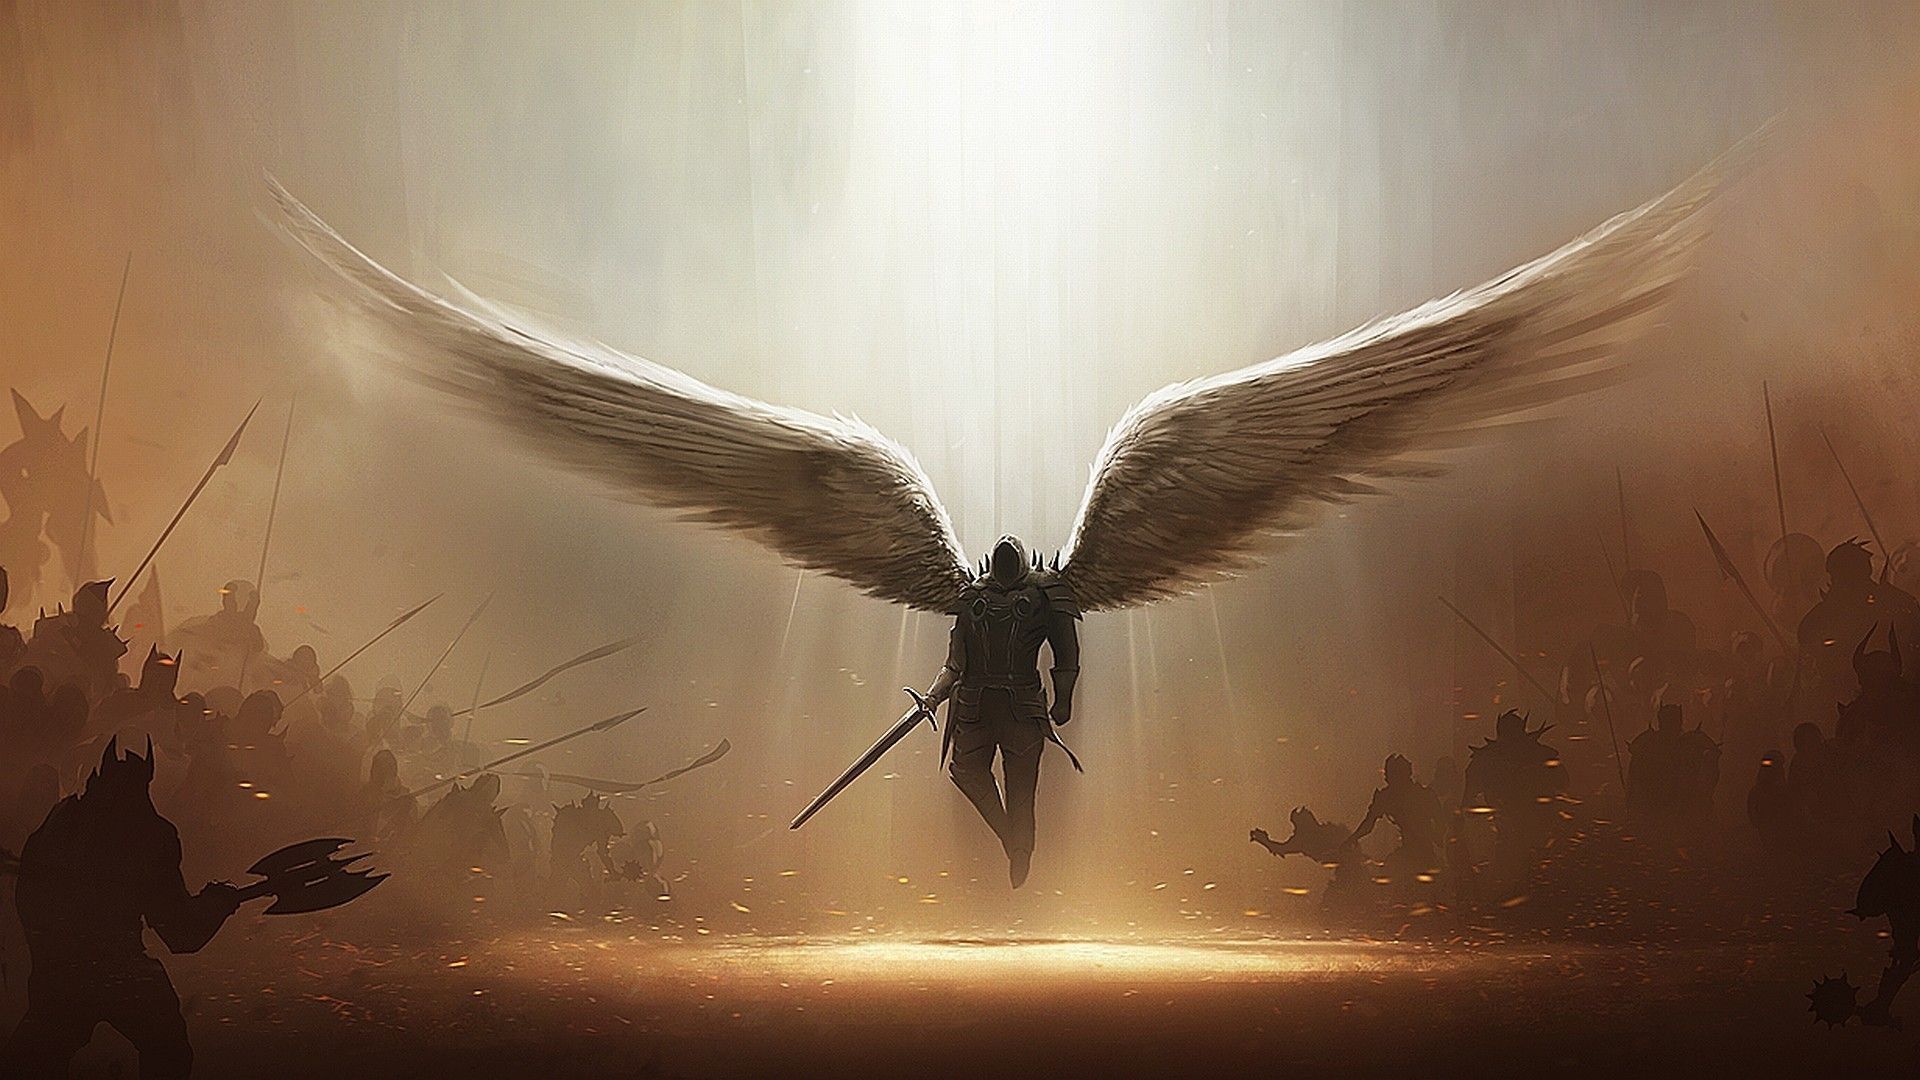 Download Winged Warrior Wallpaper Free By udhao.net